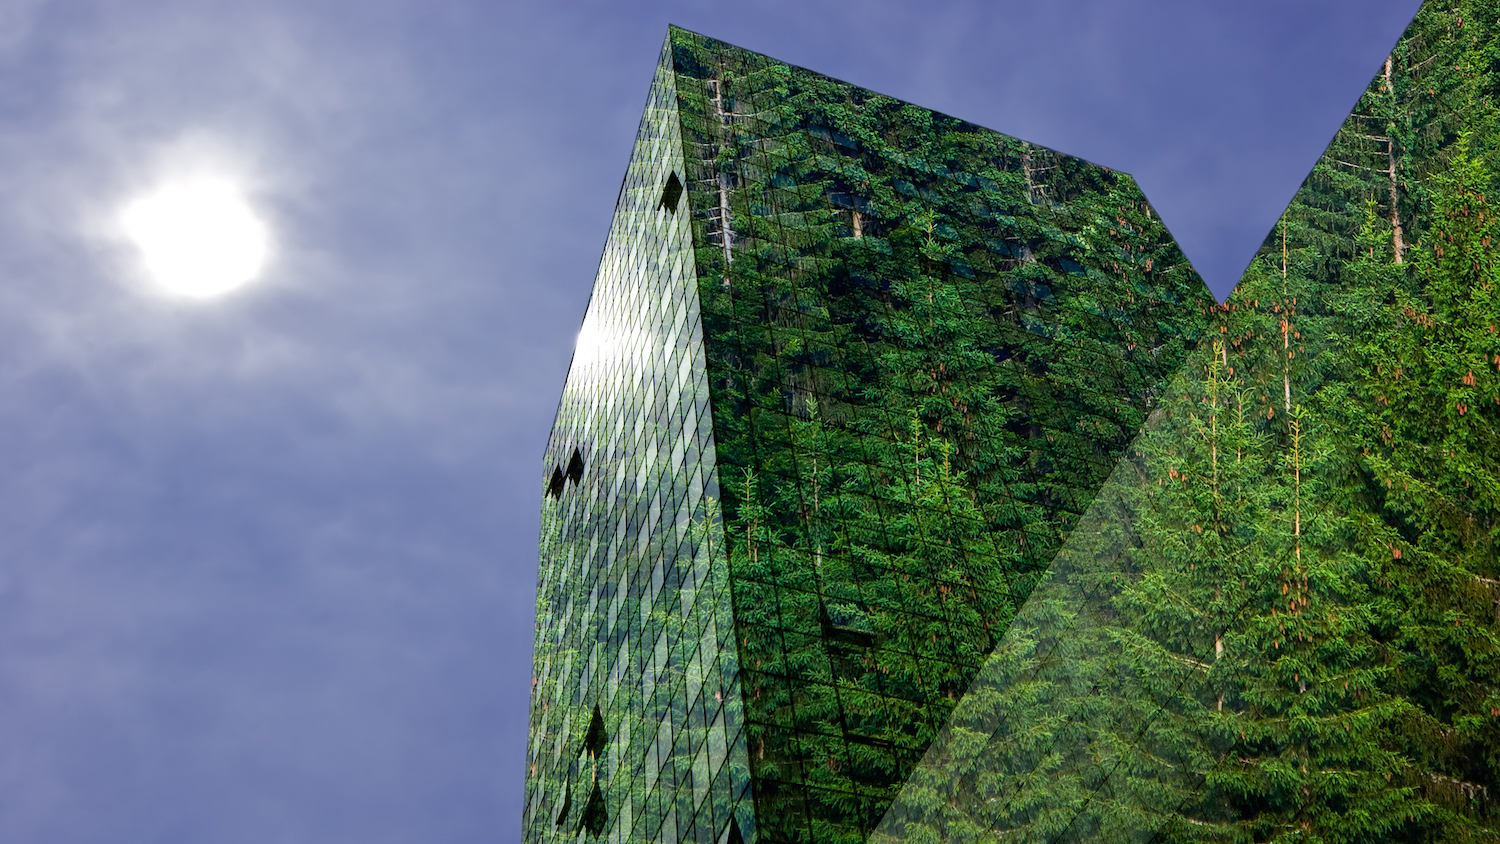 Abstract image of a 'green' building to illustrate net zero carbon building standard story - carbon database